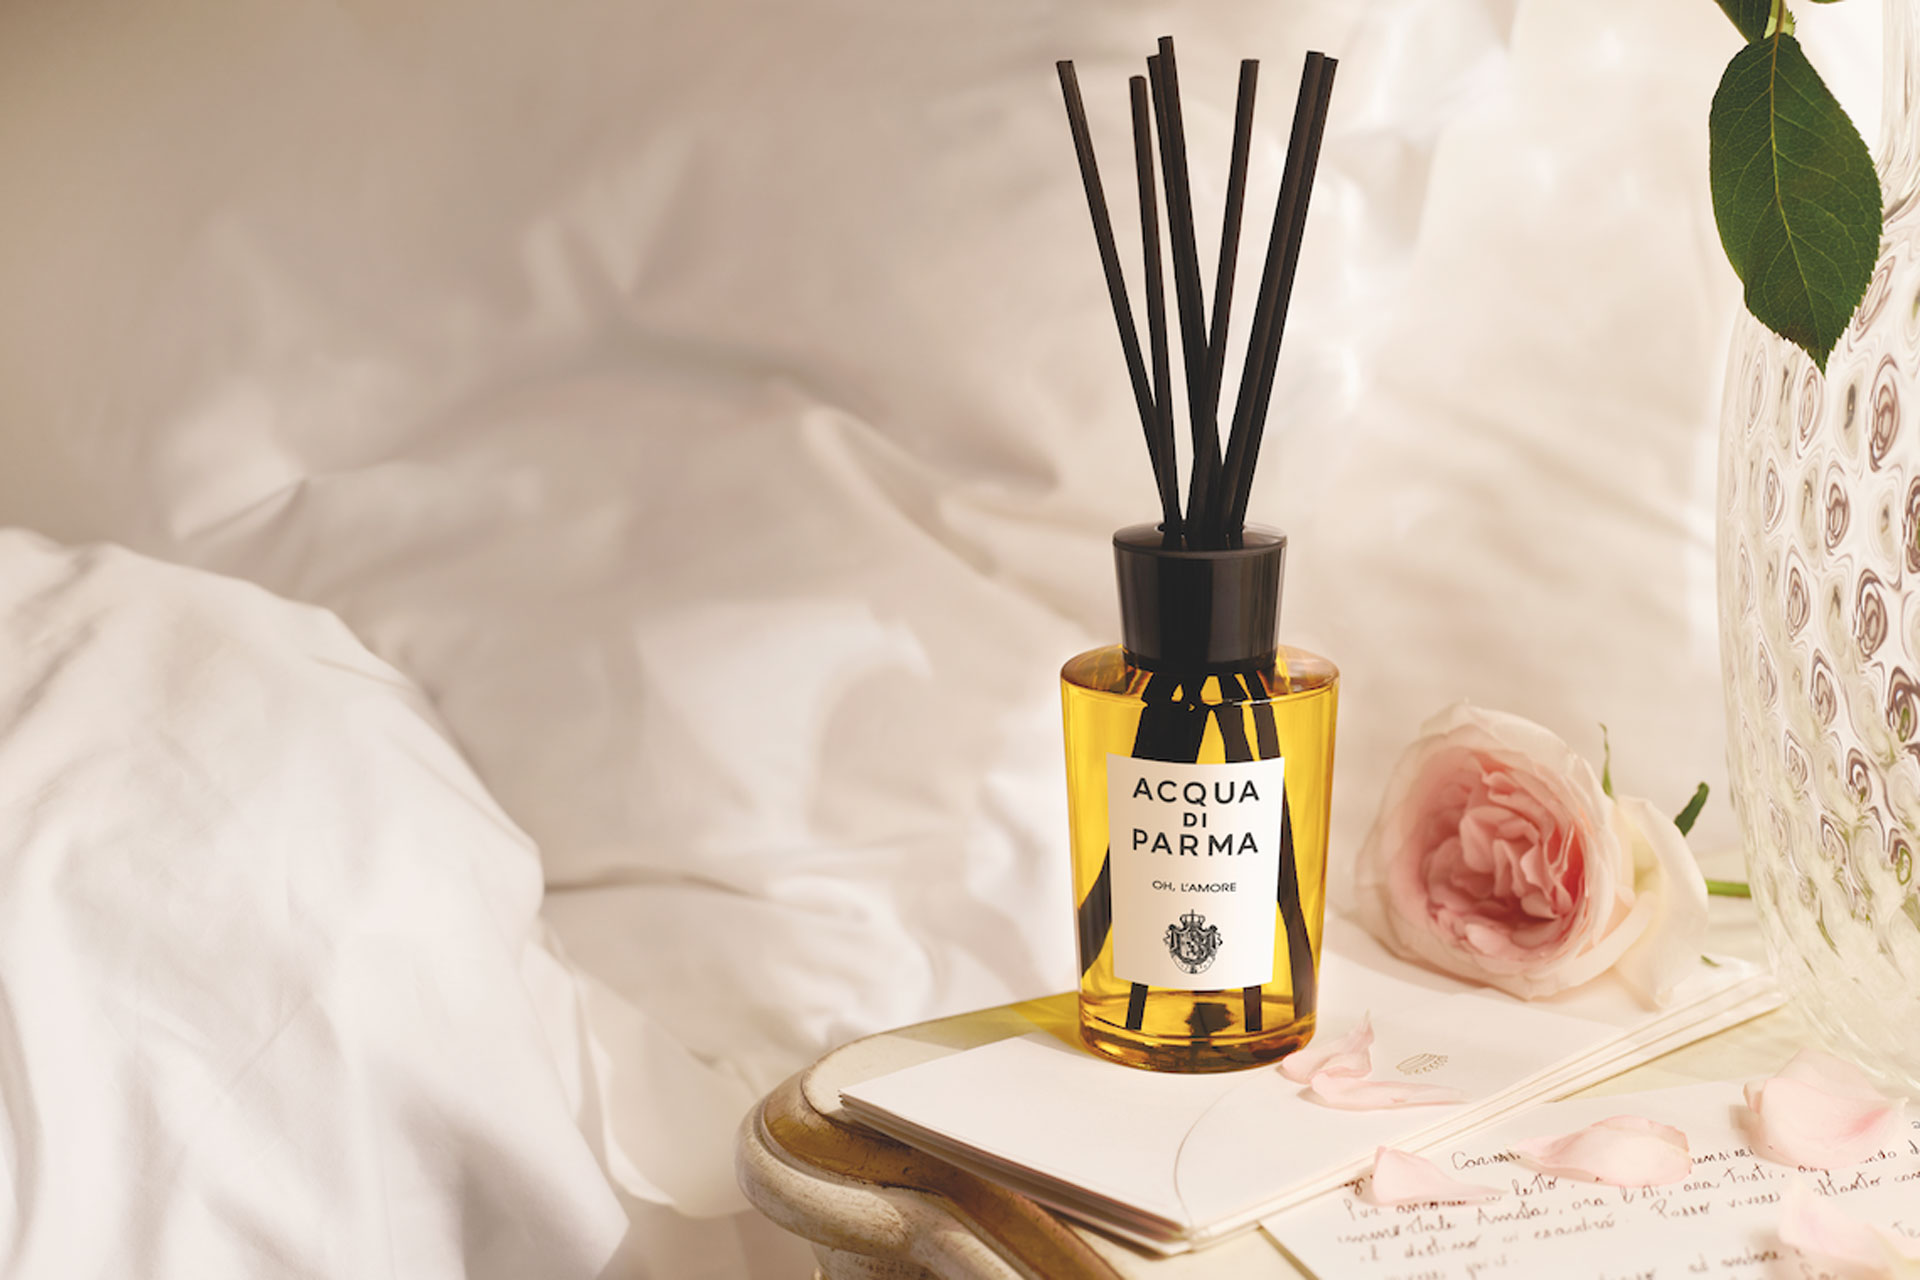 An Aqua Di Parma diffuser next to a bed on a bedside table with a rose on it